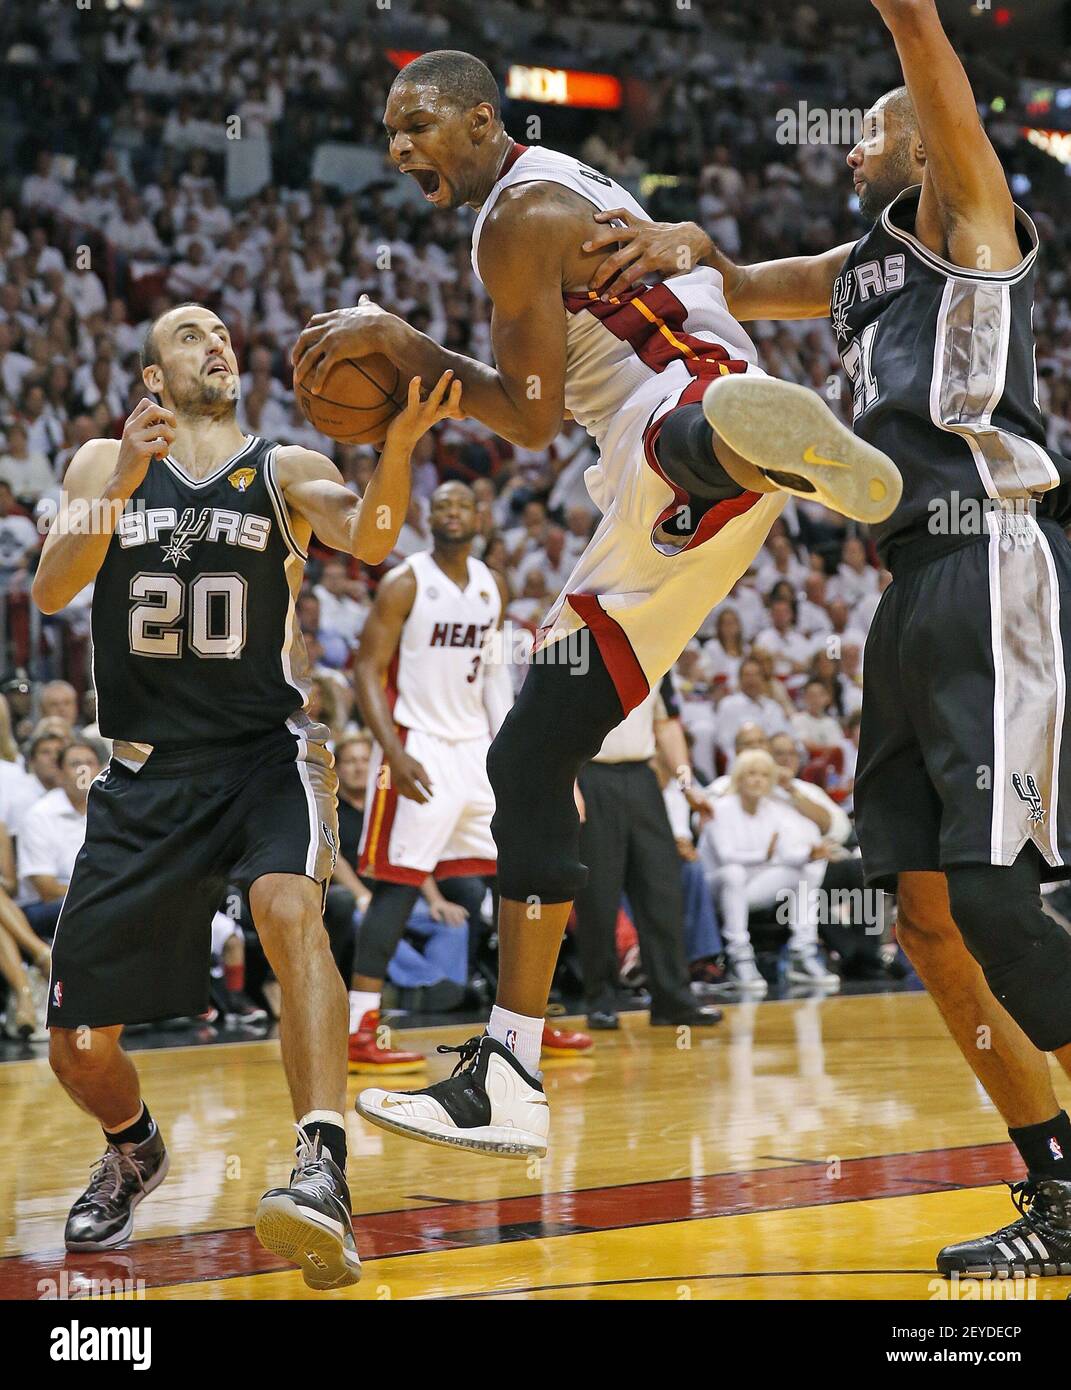 https://c8.alamy.com/comp/2EYDECP/chris-bosh-of-the-miami-herald-on-an-offensive-rebound-during-the-third-quarter-in-game-2-of-the-nba-finals-at-the-americanairlines-arena-in-miami-florida-sunday-june-9-2013-the-miami-heat-defeated-the-san-antonio-spurs-103-84-photo-by-al-diazmiami-heraldmctsipa-usa-2EYDECP.jpg